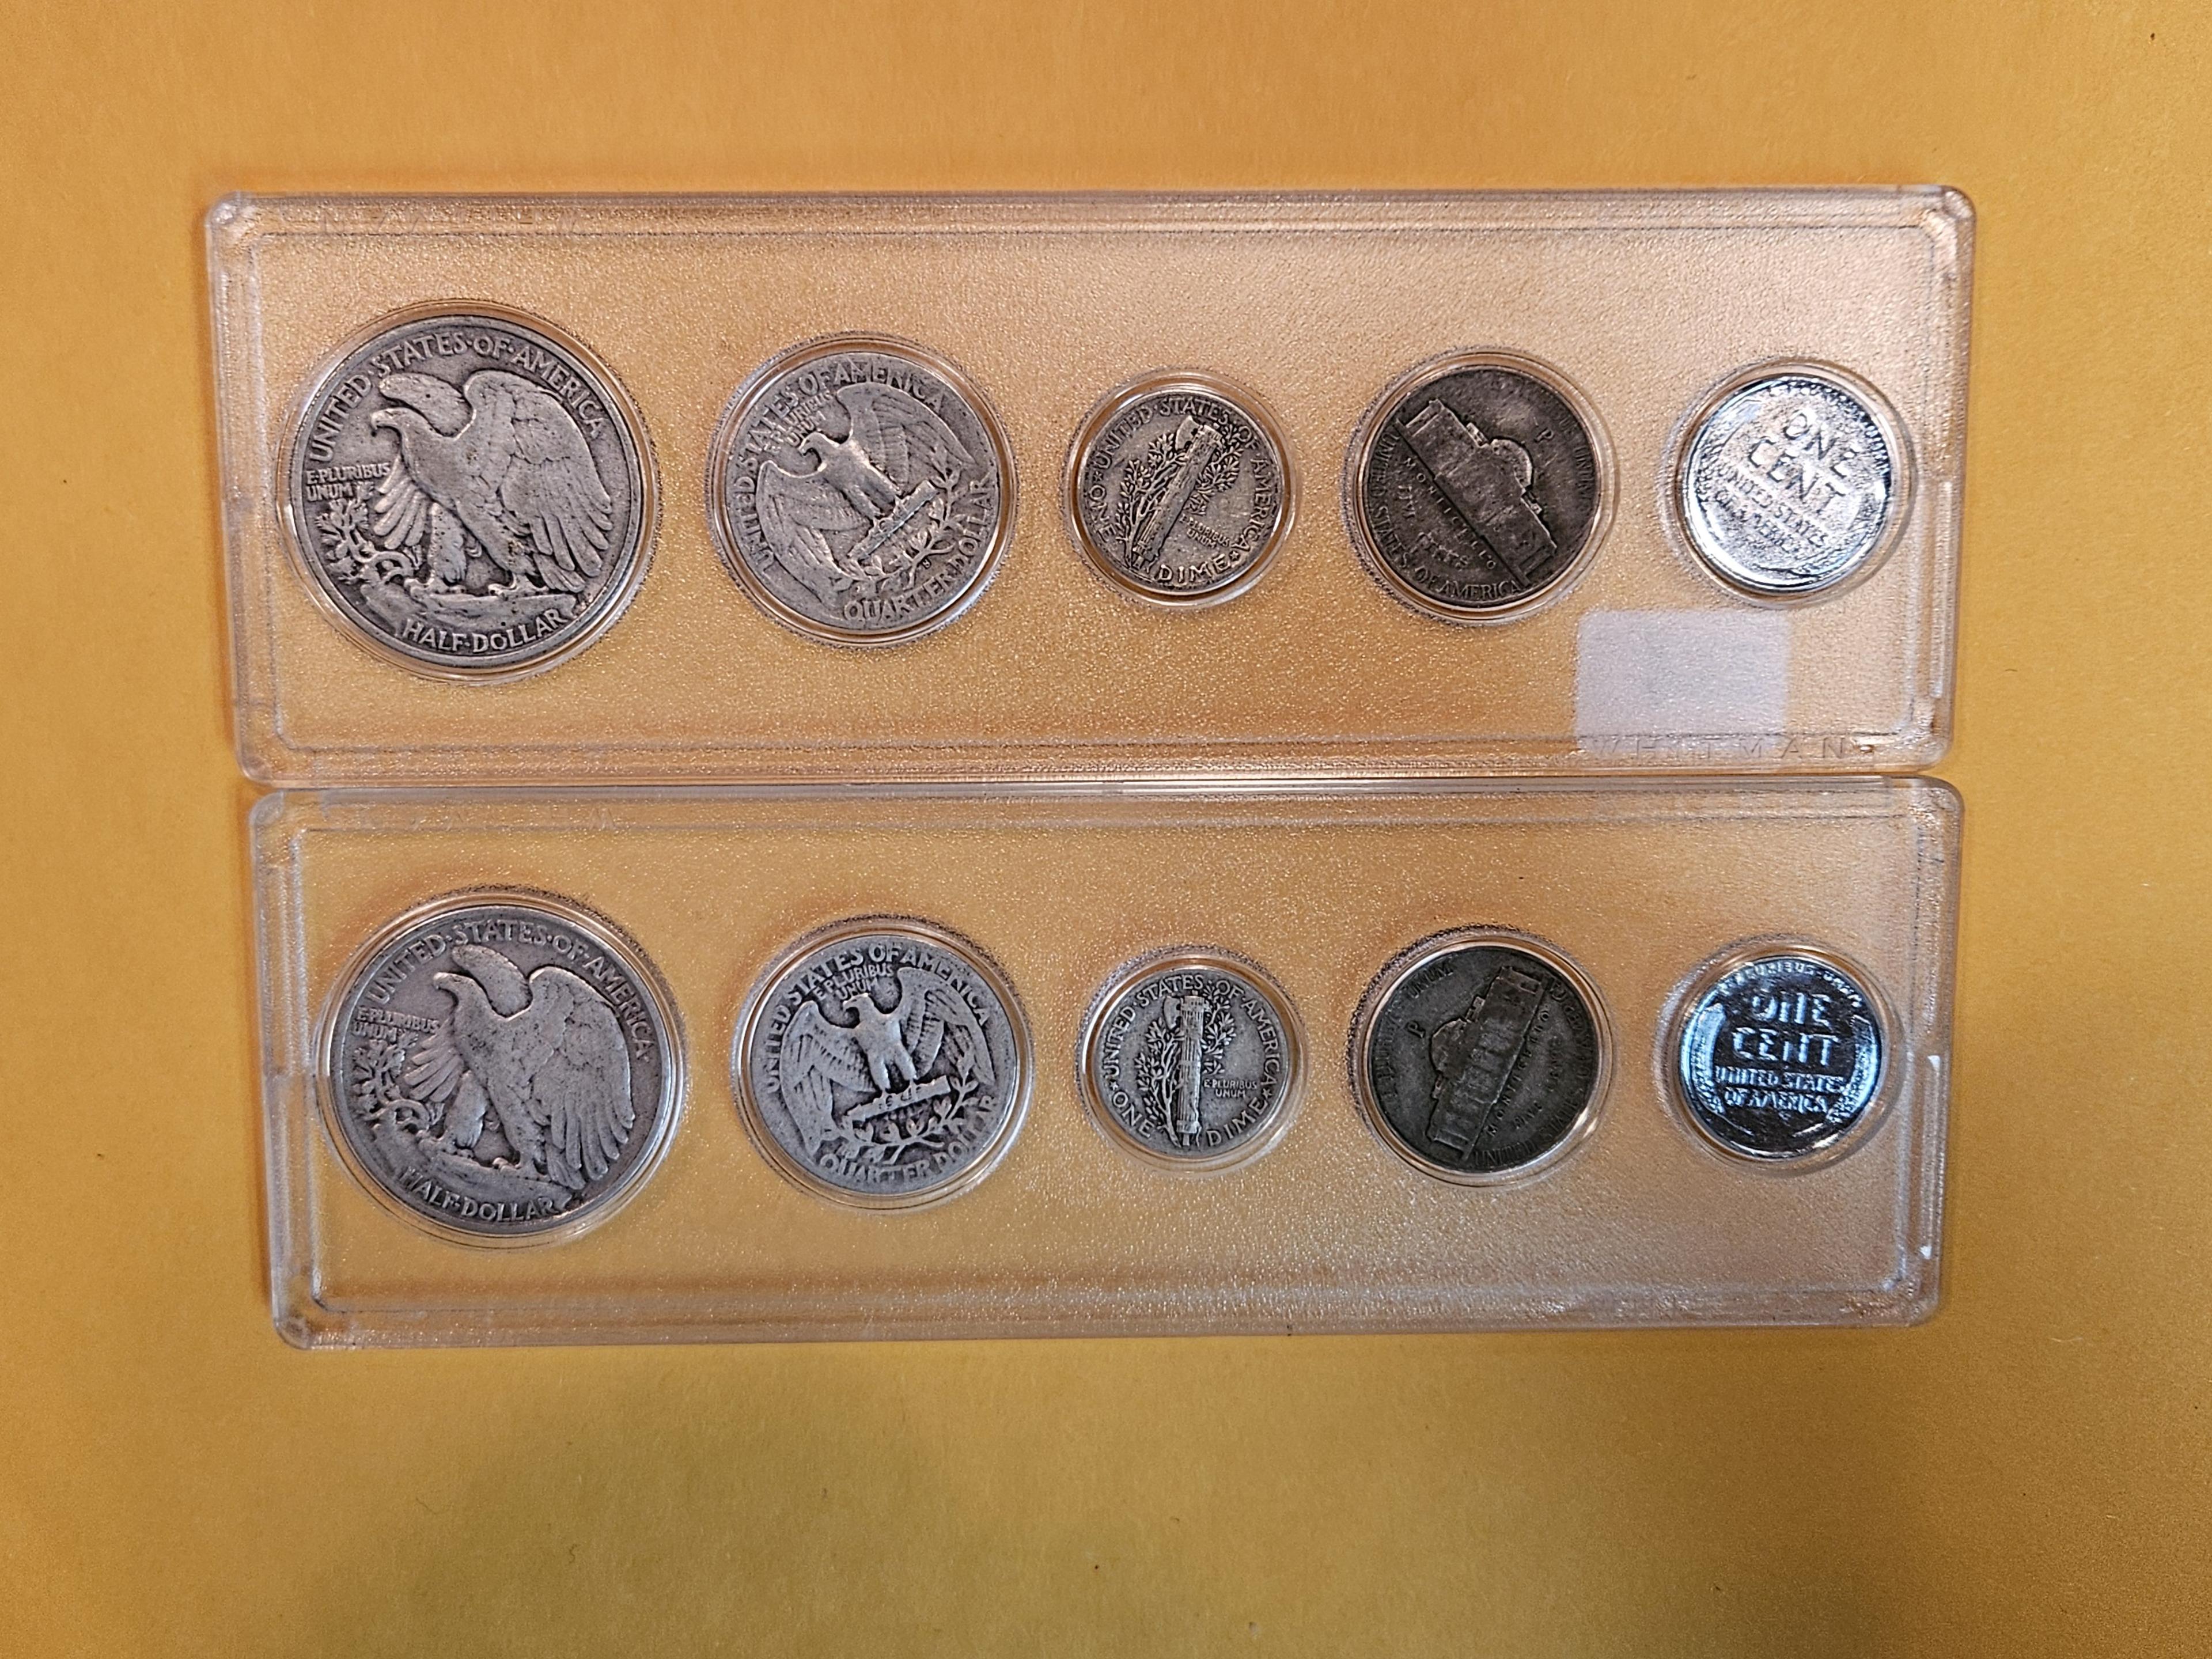 Two 1943 Year Coin Sets